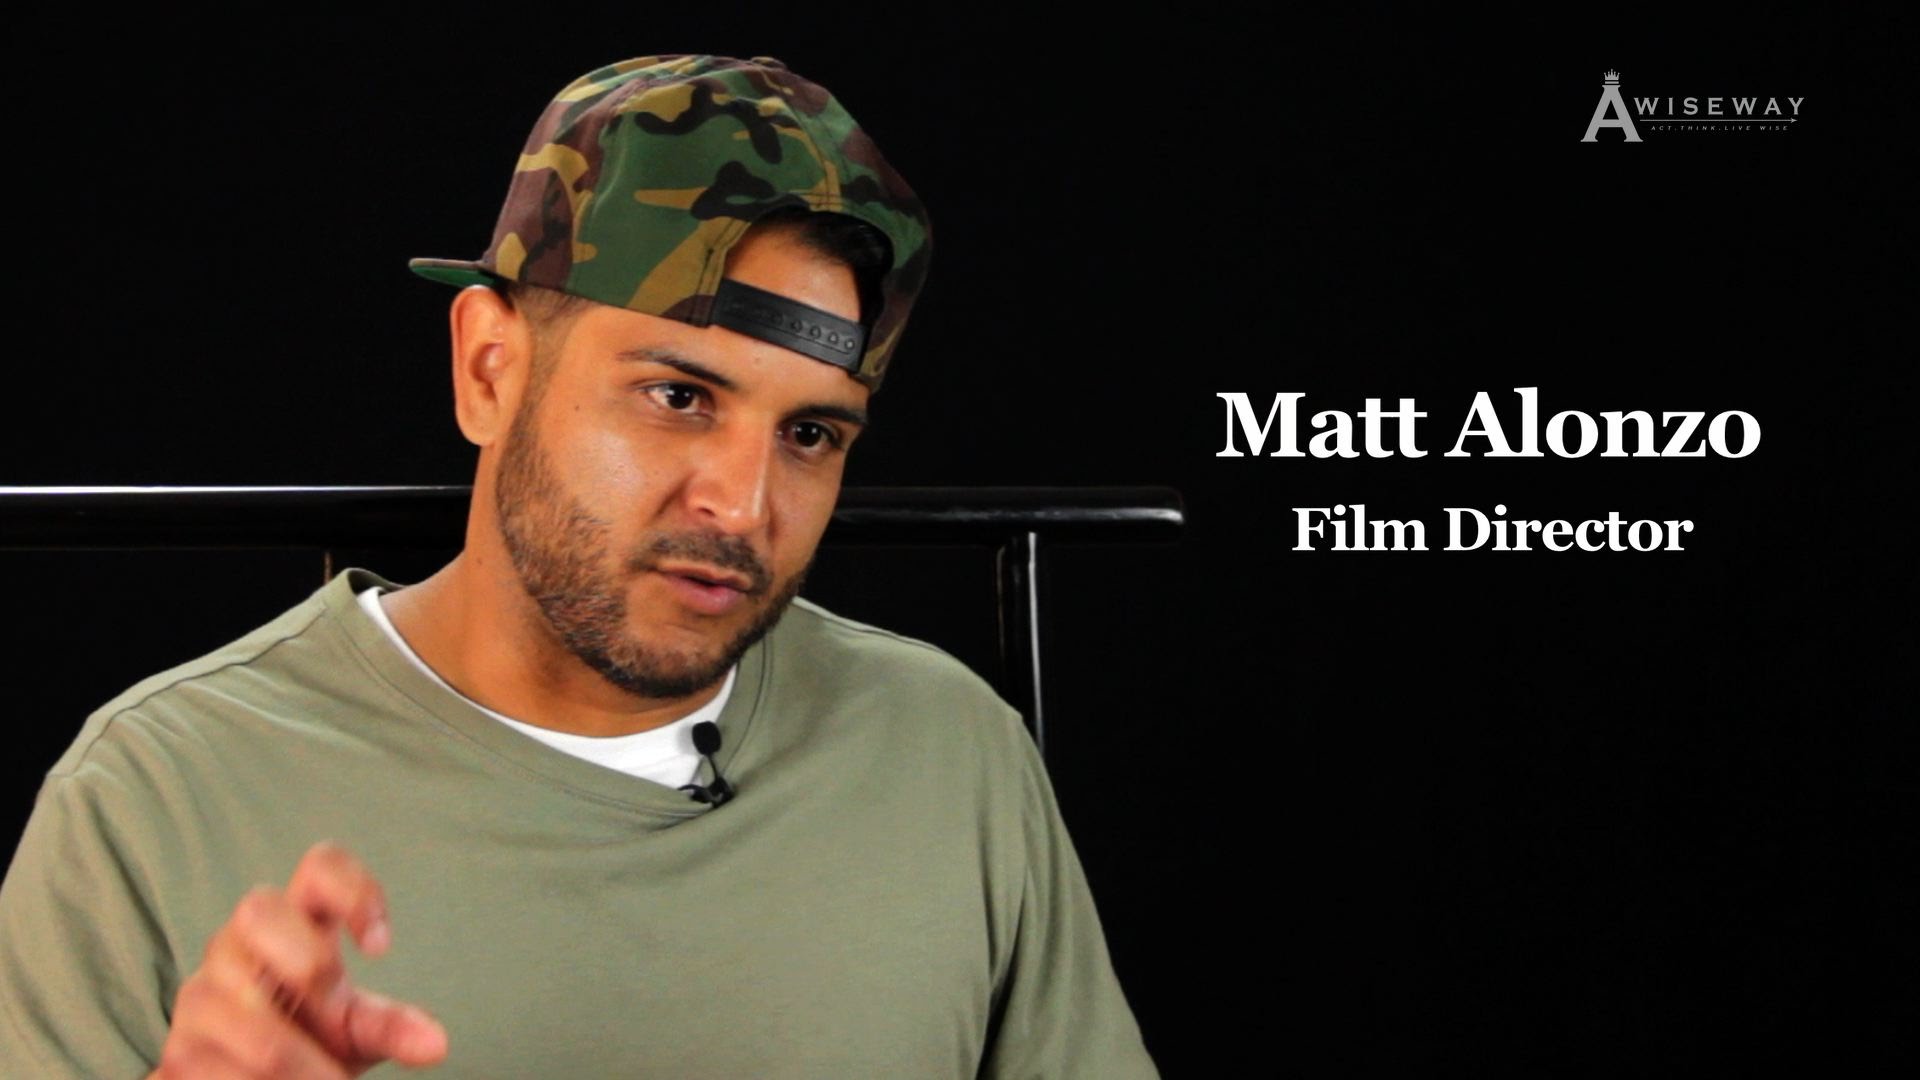 Film Director, Matt Alonzo Talks About How He Lost His Way Living the Hollywood Life